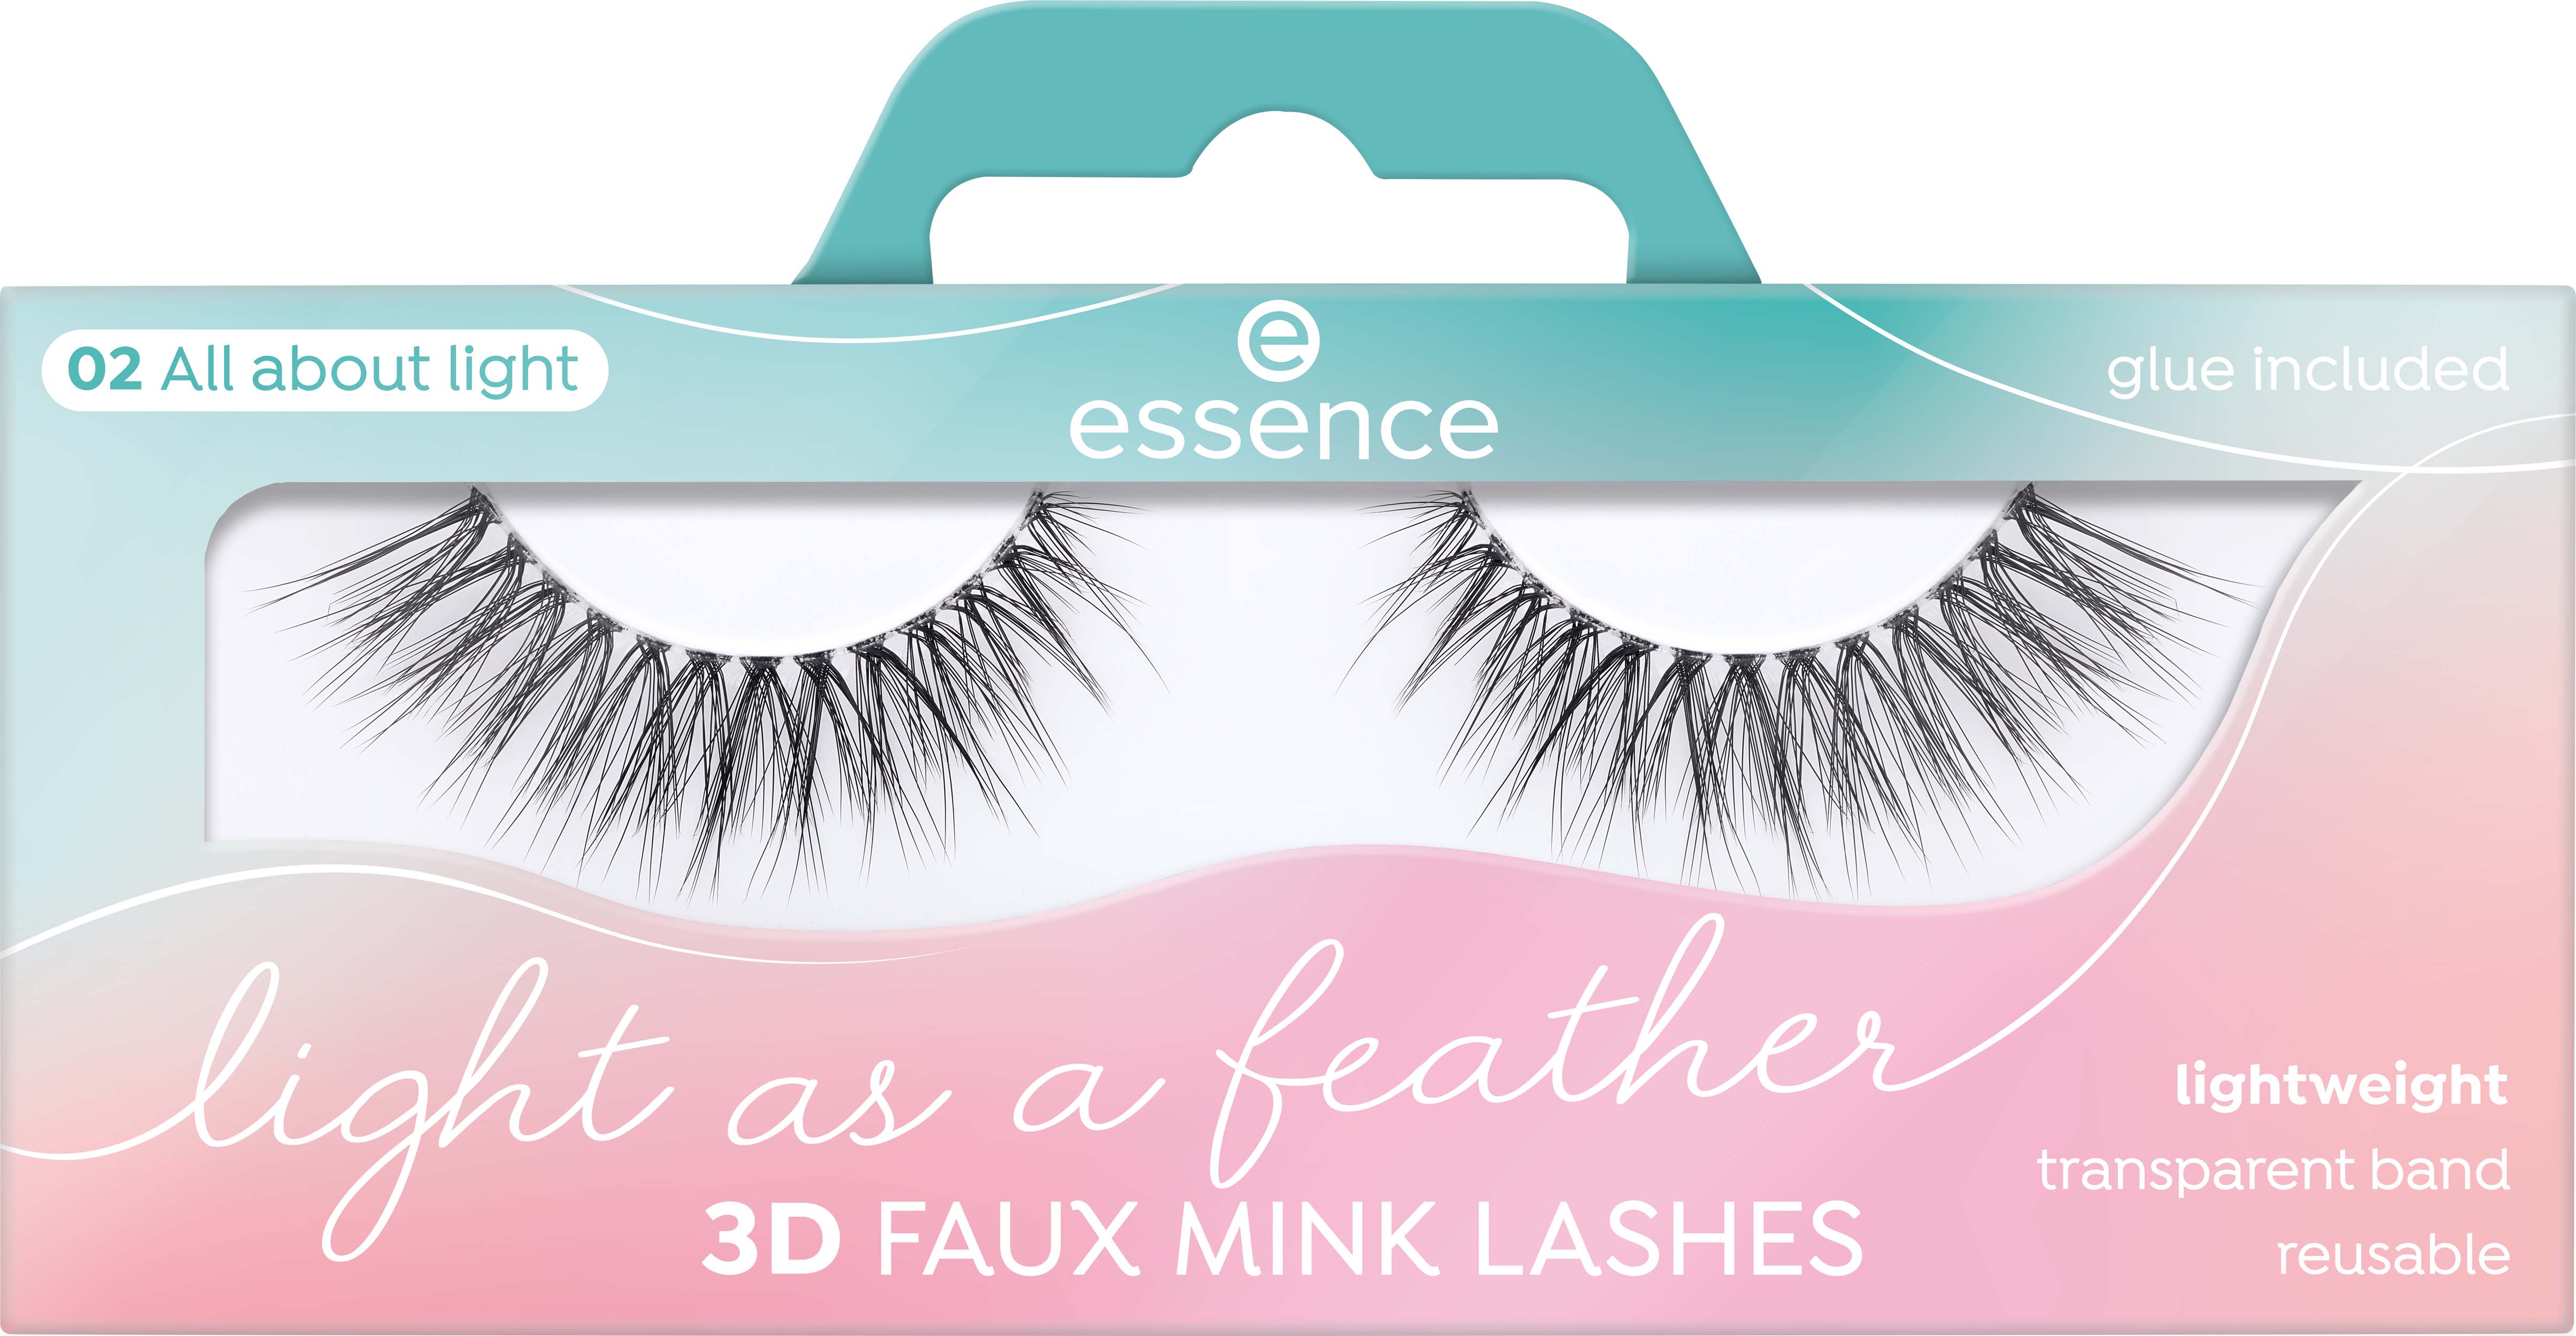 essence Light 3D As Feather Lashes 02 All Faux A about Mink light